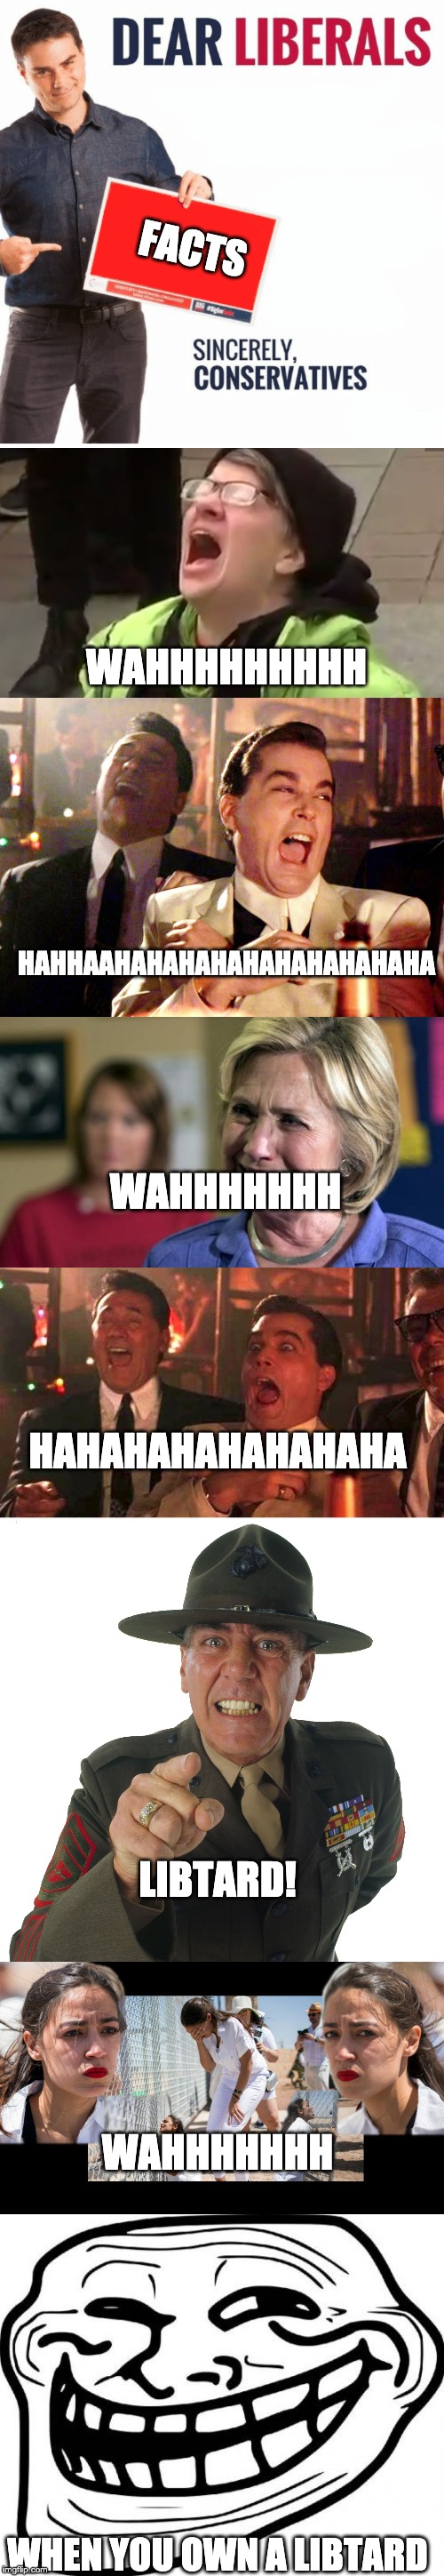 FACTS; WAHHHHHHHHH; HAHHAAHAHAHAHAHAHAHAHAHAHA; WAHHHHHHH; HAHAHAHAHAHAHAHA; LIBTARD! WAHHHHHHH; WHEN YOU OWN A LIBTARD | image tagged in memes,troll face,goodfellas laughing scene henry hill,good fellas hilarious,hillary crying,r lee ermey | made w/ Imgflip meme maker